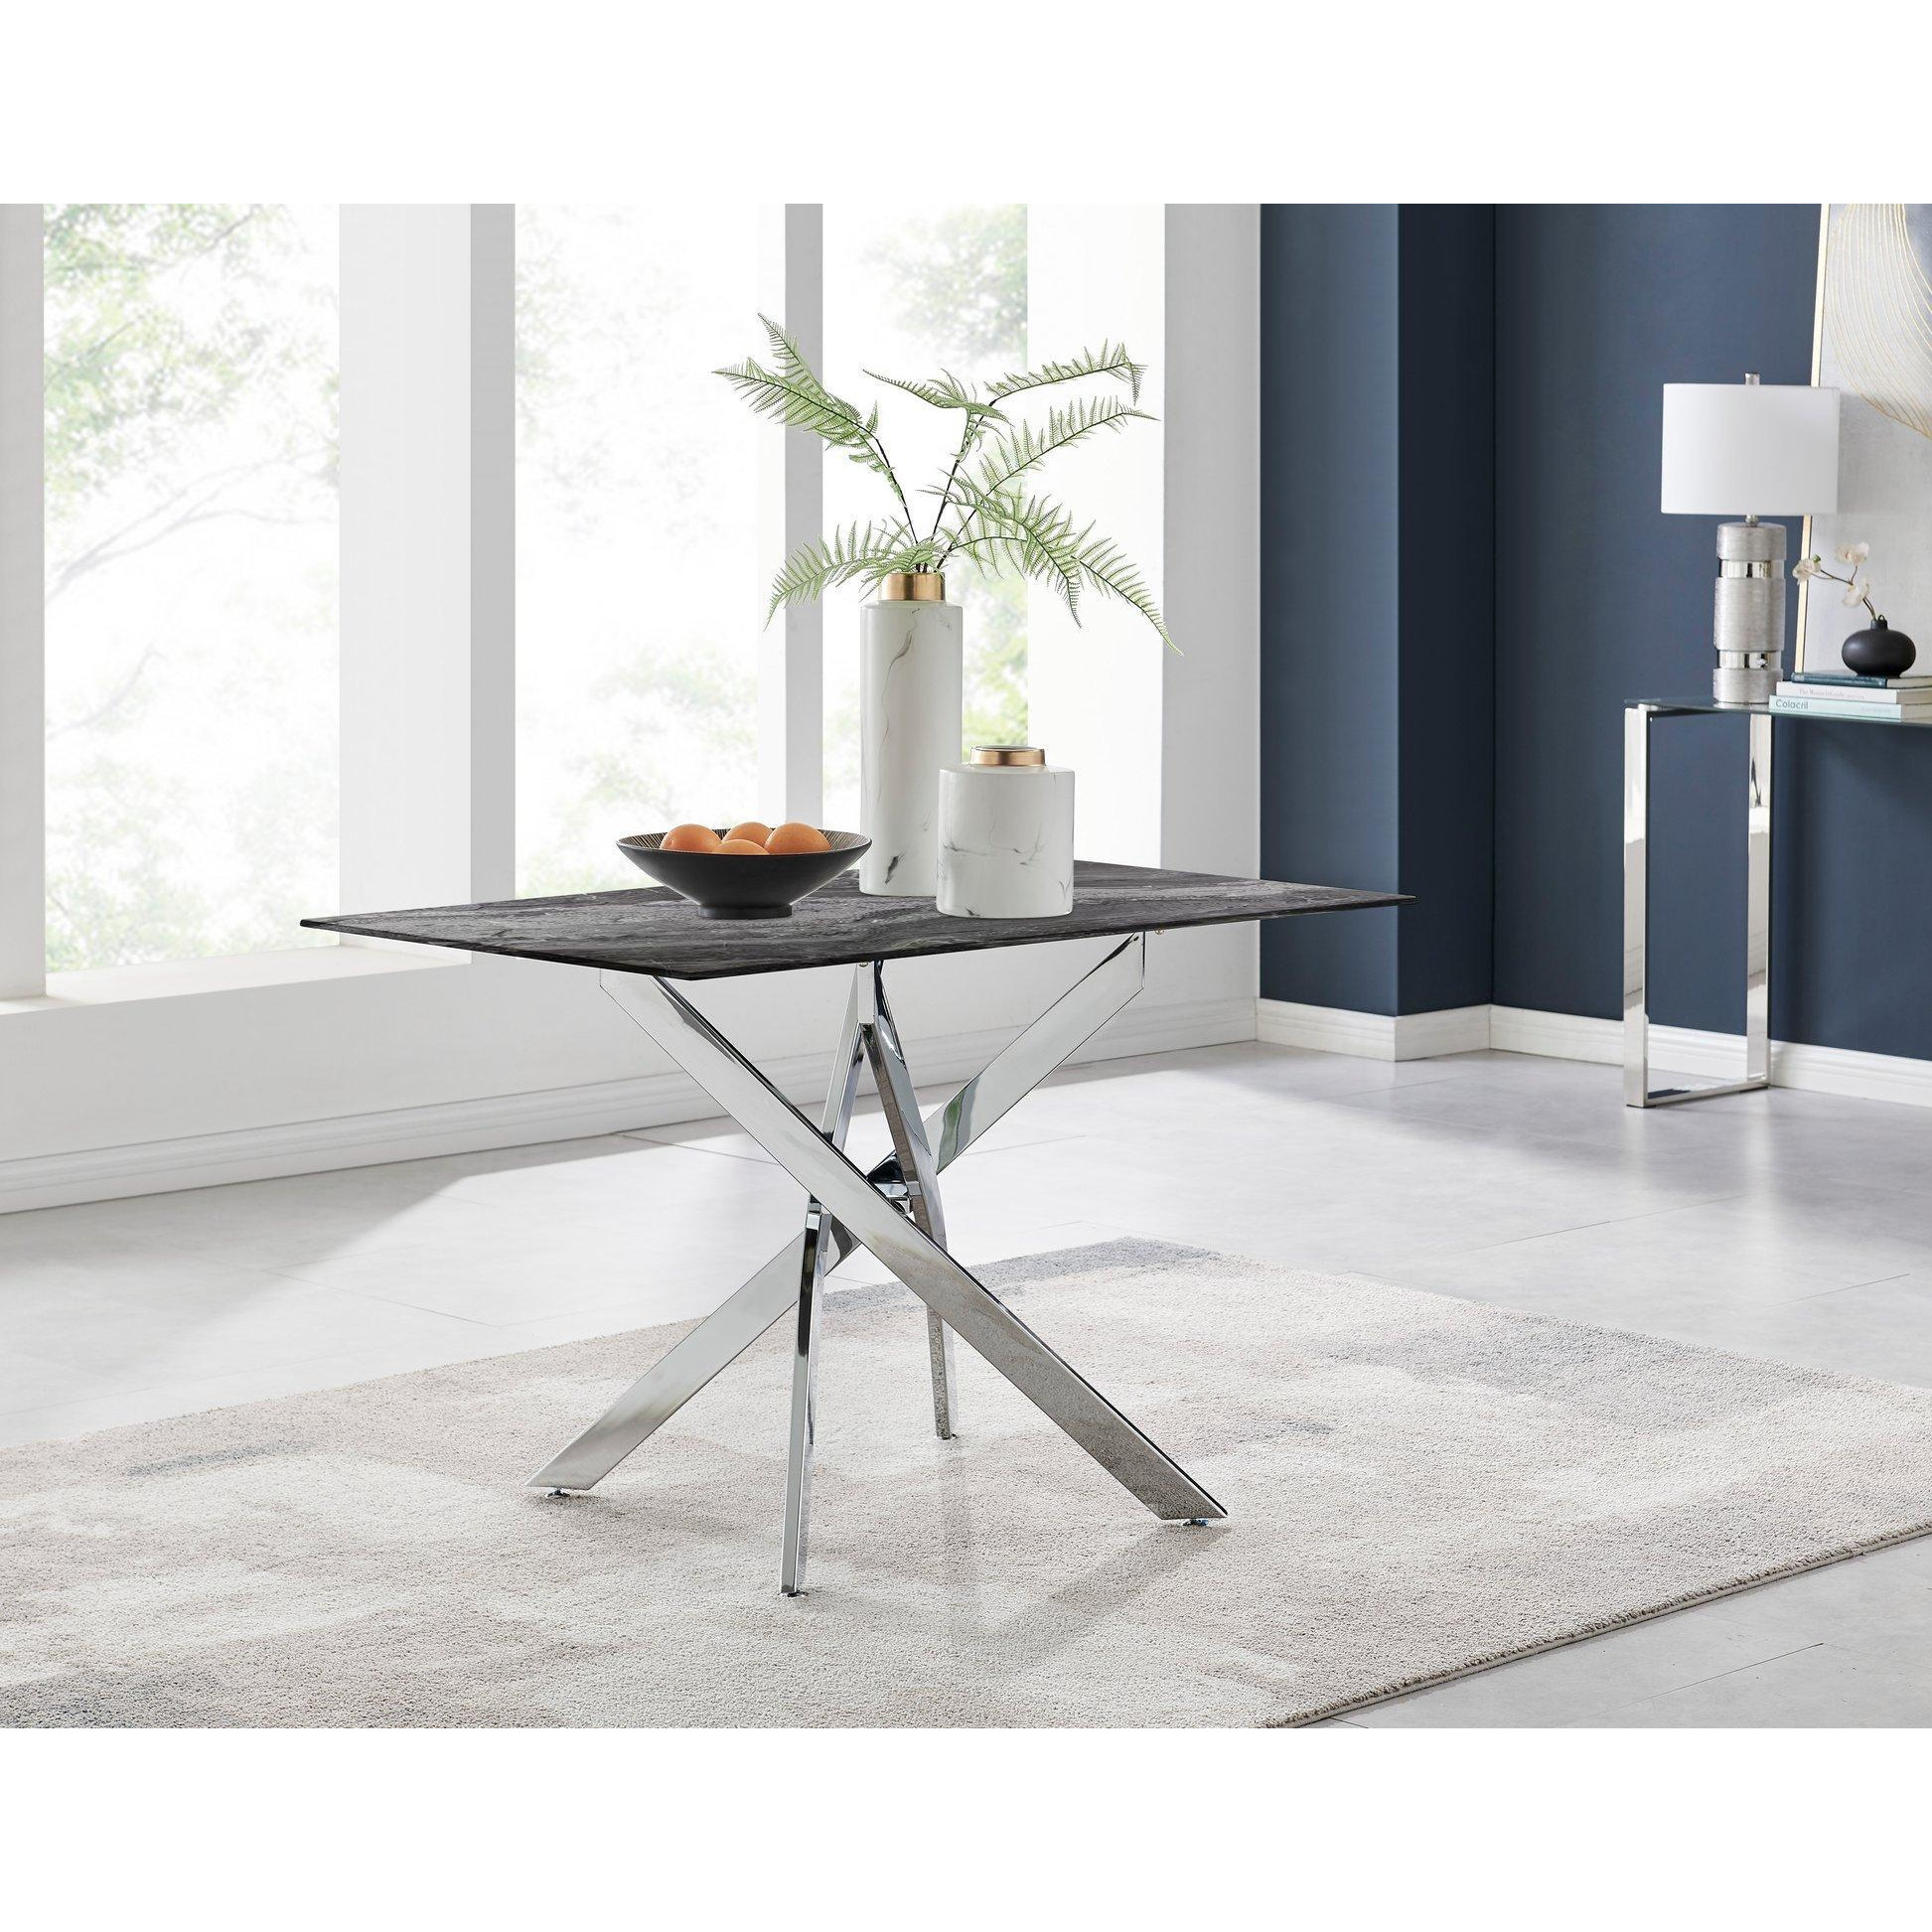 Leonardo 4-Seater Dining Table With Marble Effect Glass Top And Silver Metal Legs - image 1